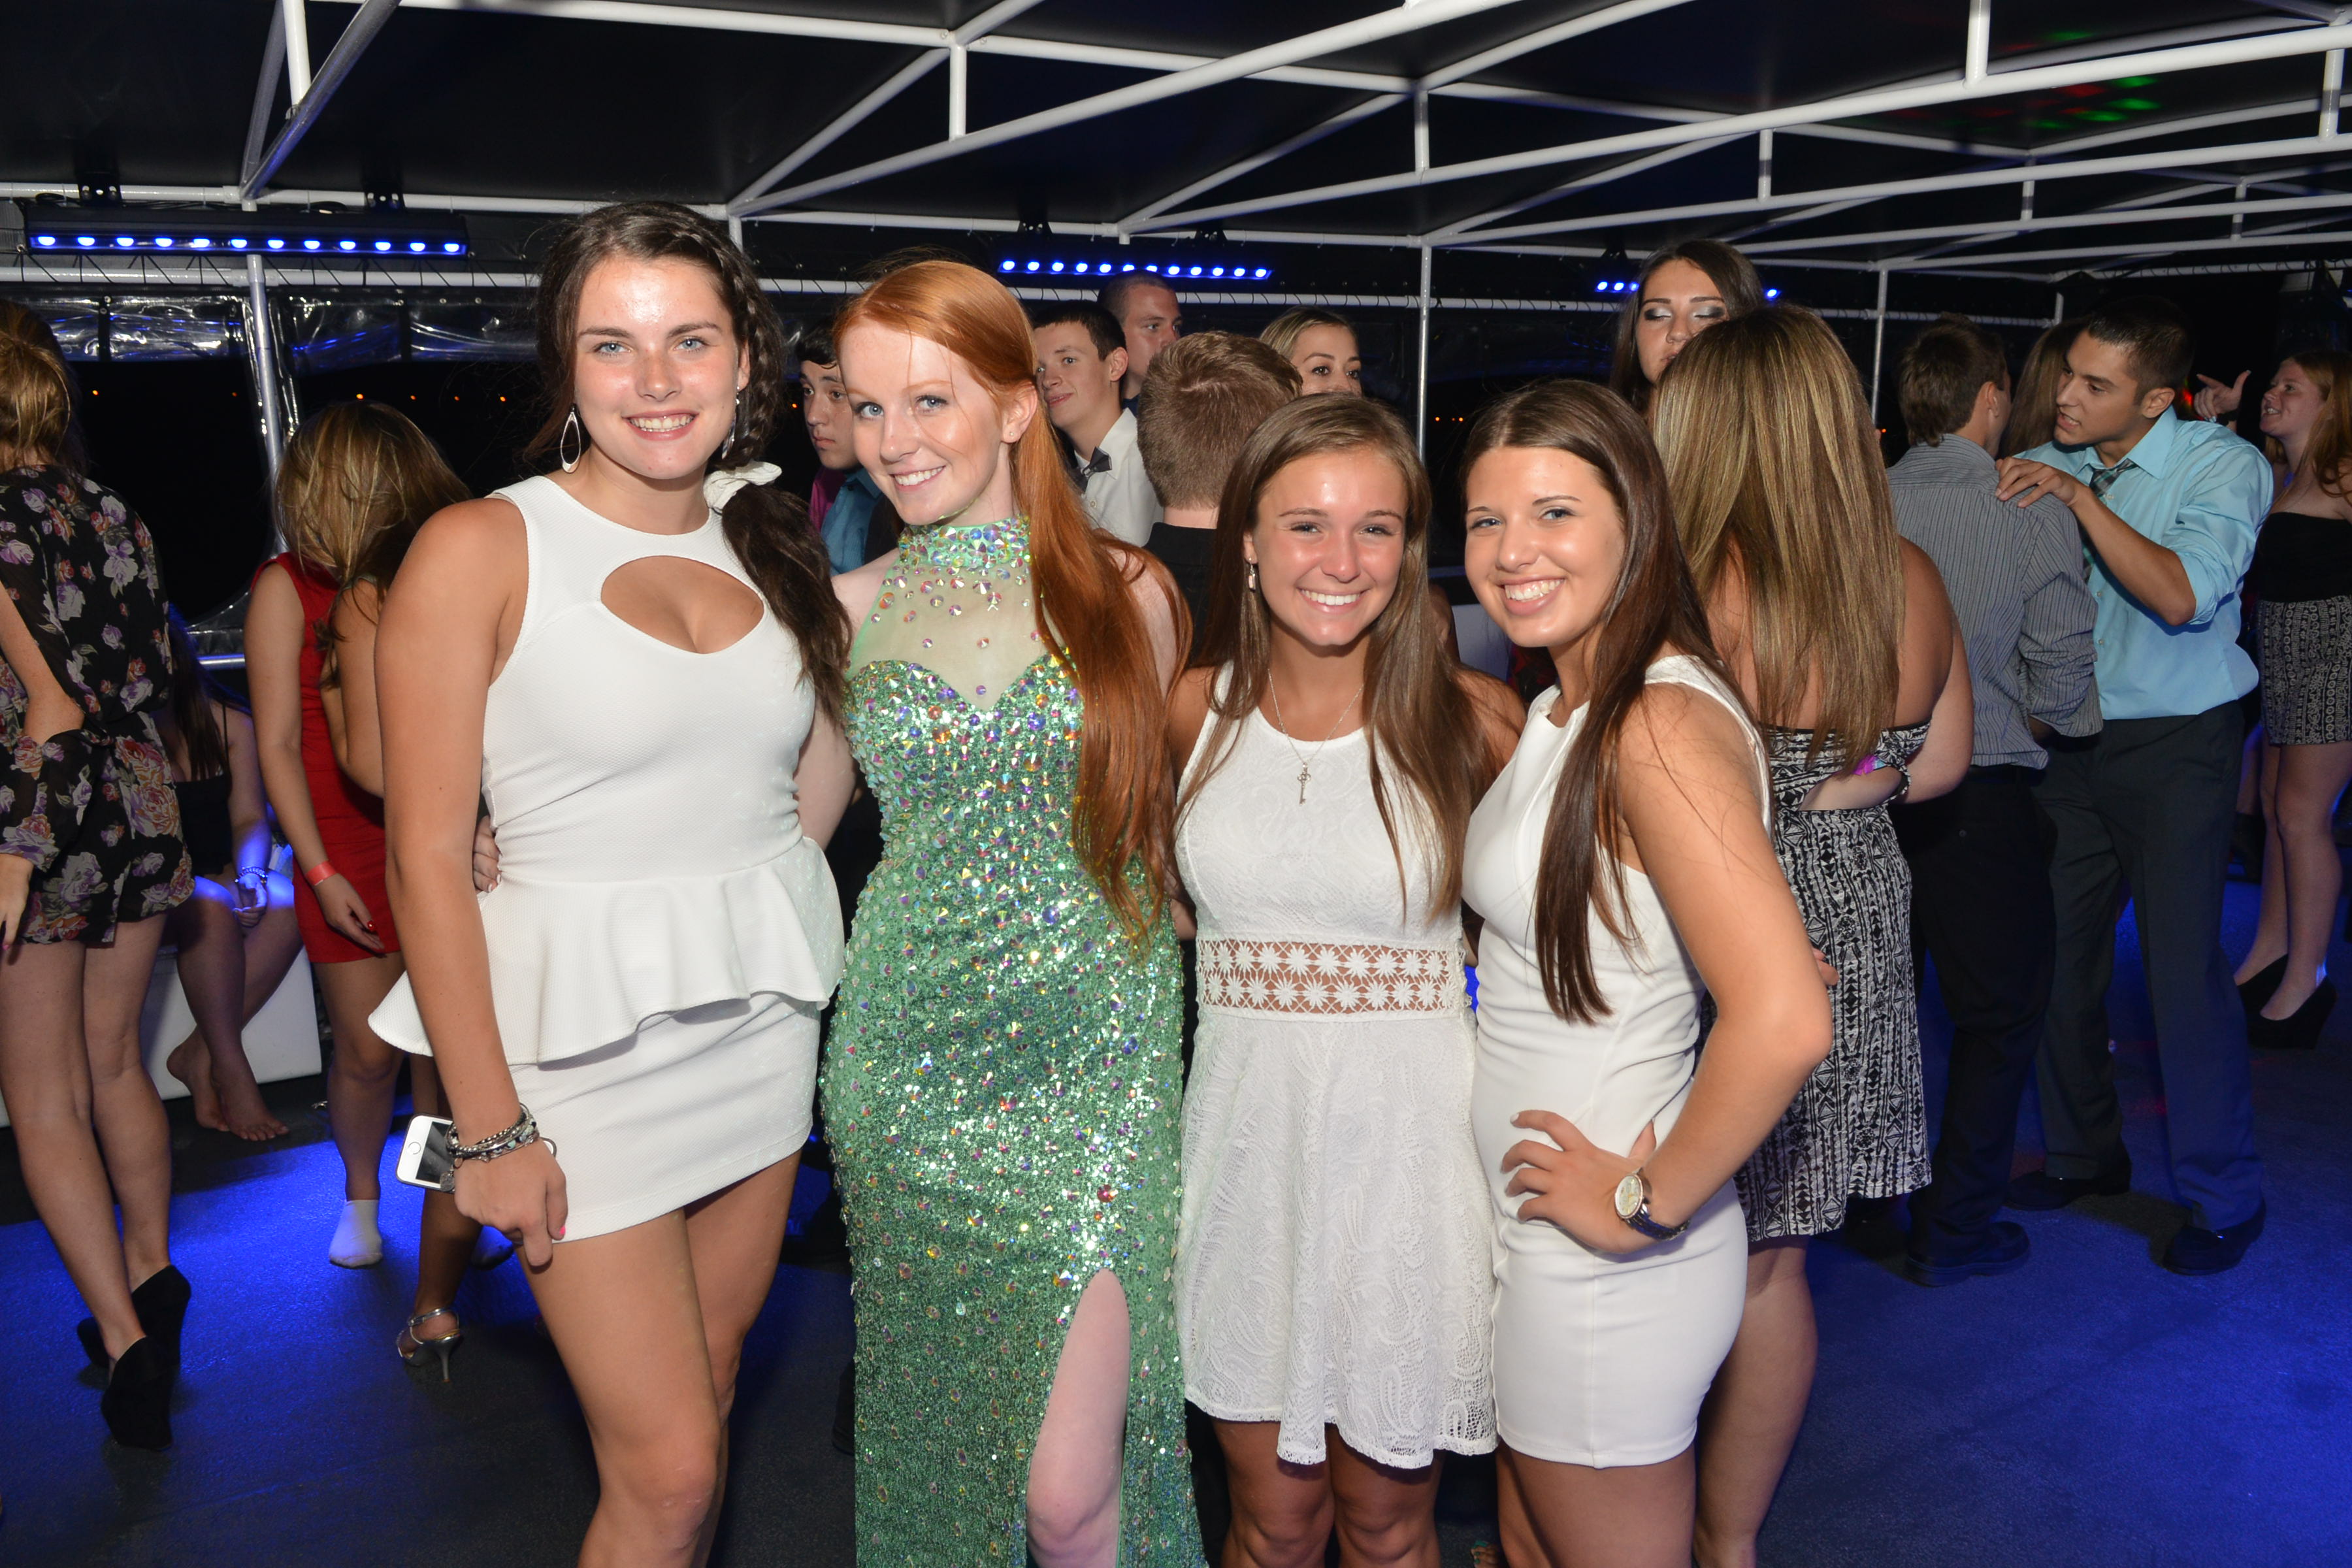 yacht rentals for sweet 16